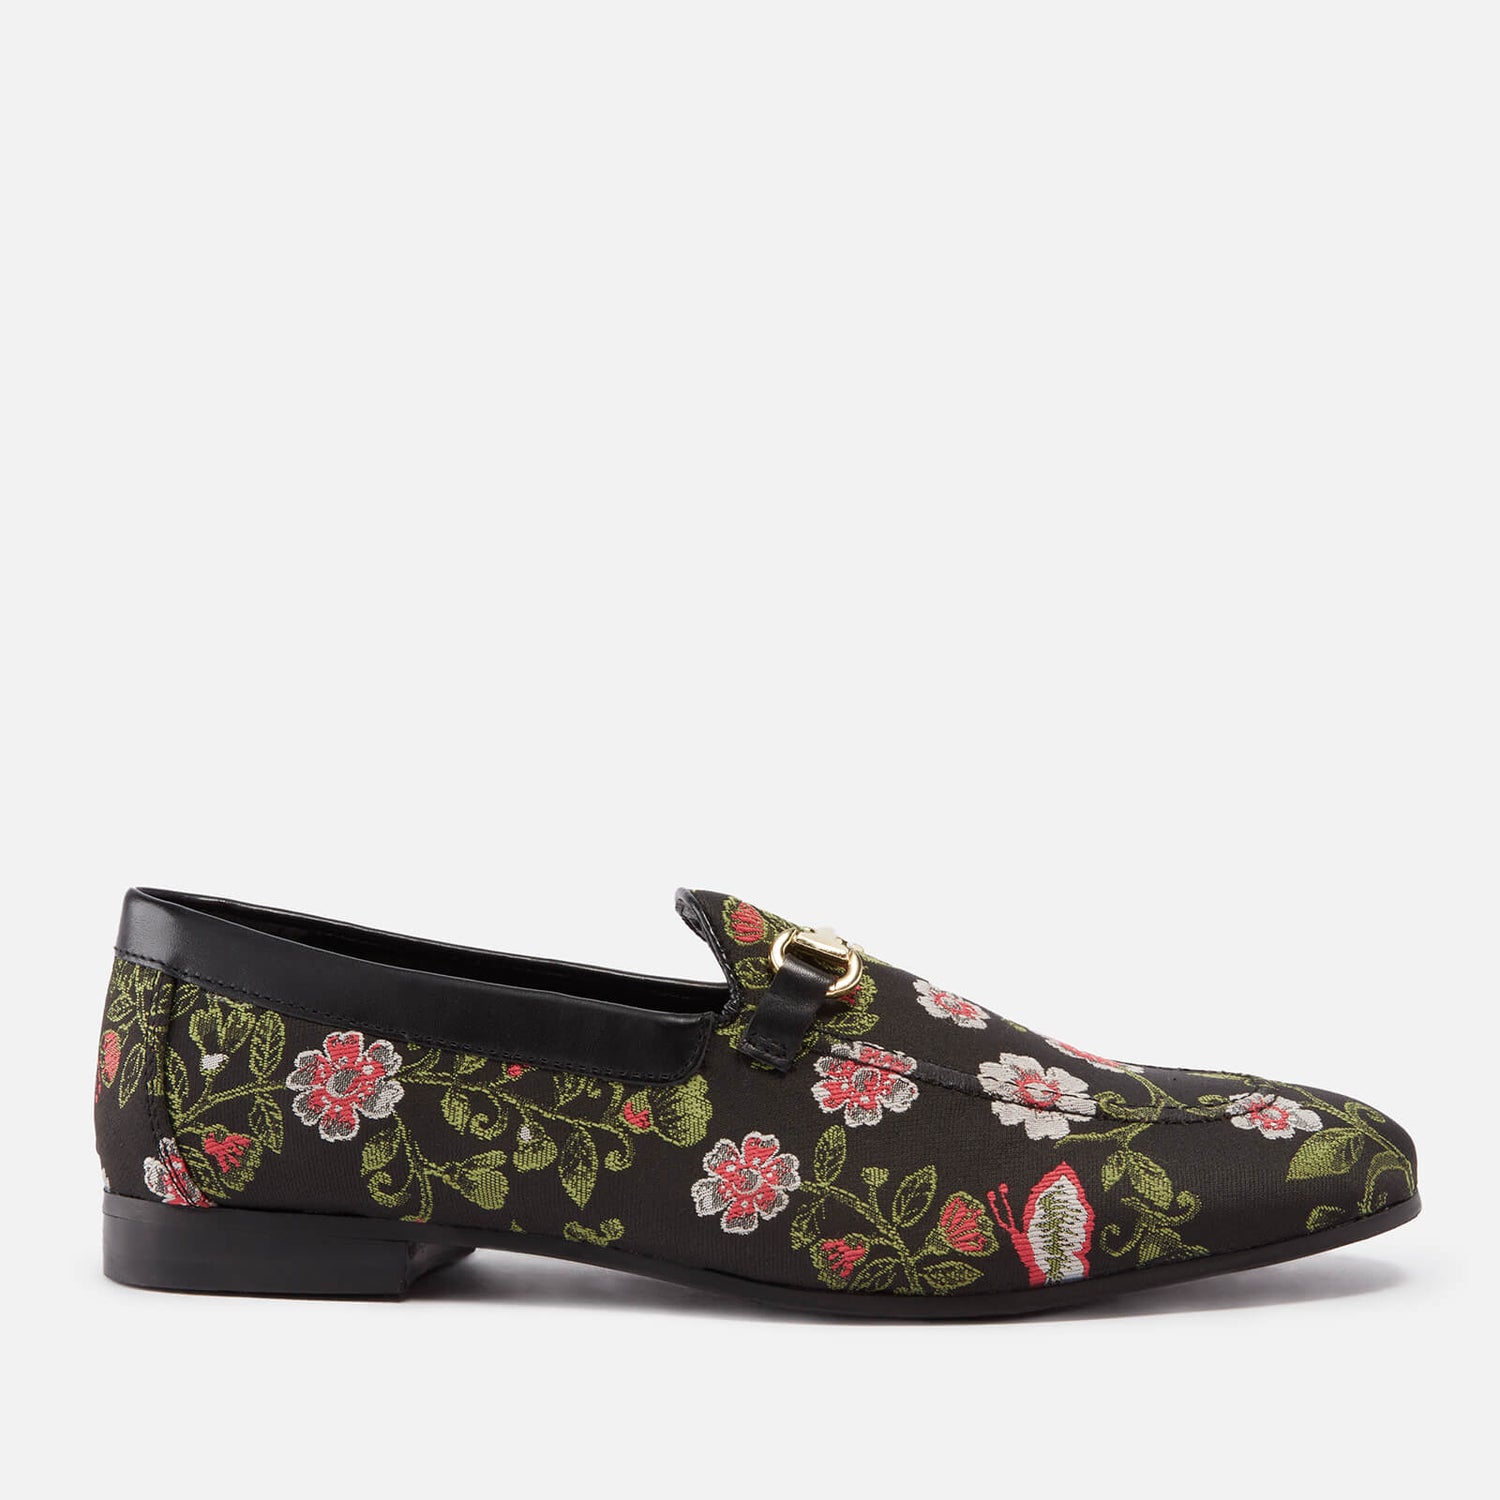 Walk London Joey Floral Canvas Loafers - 8